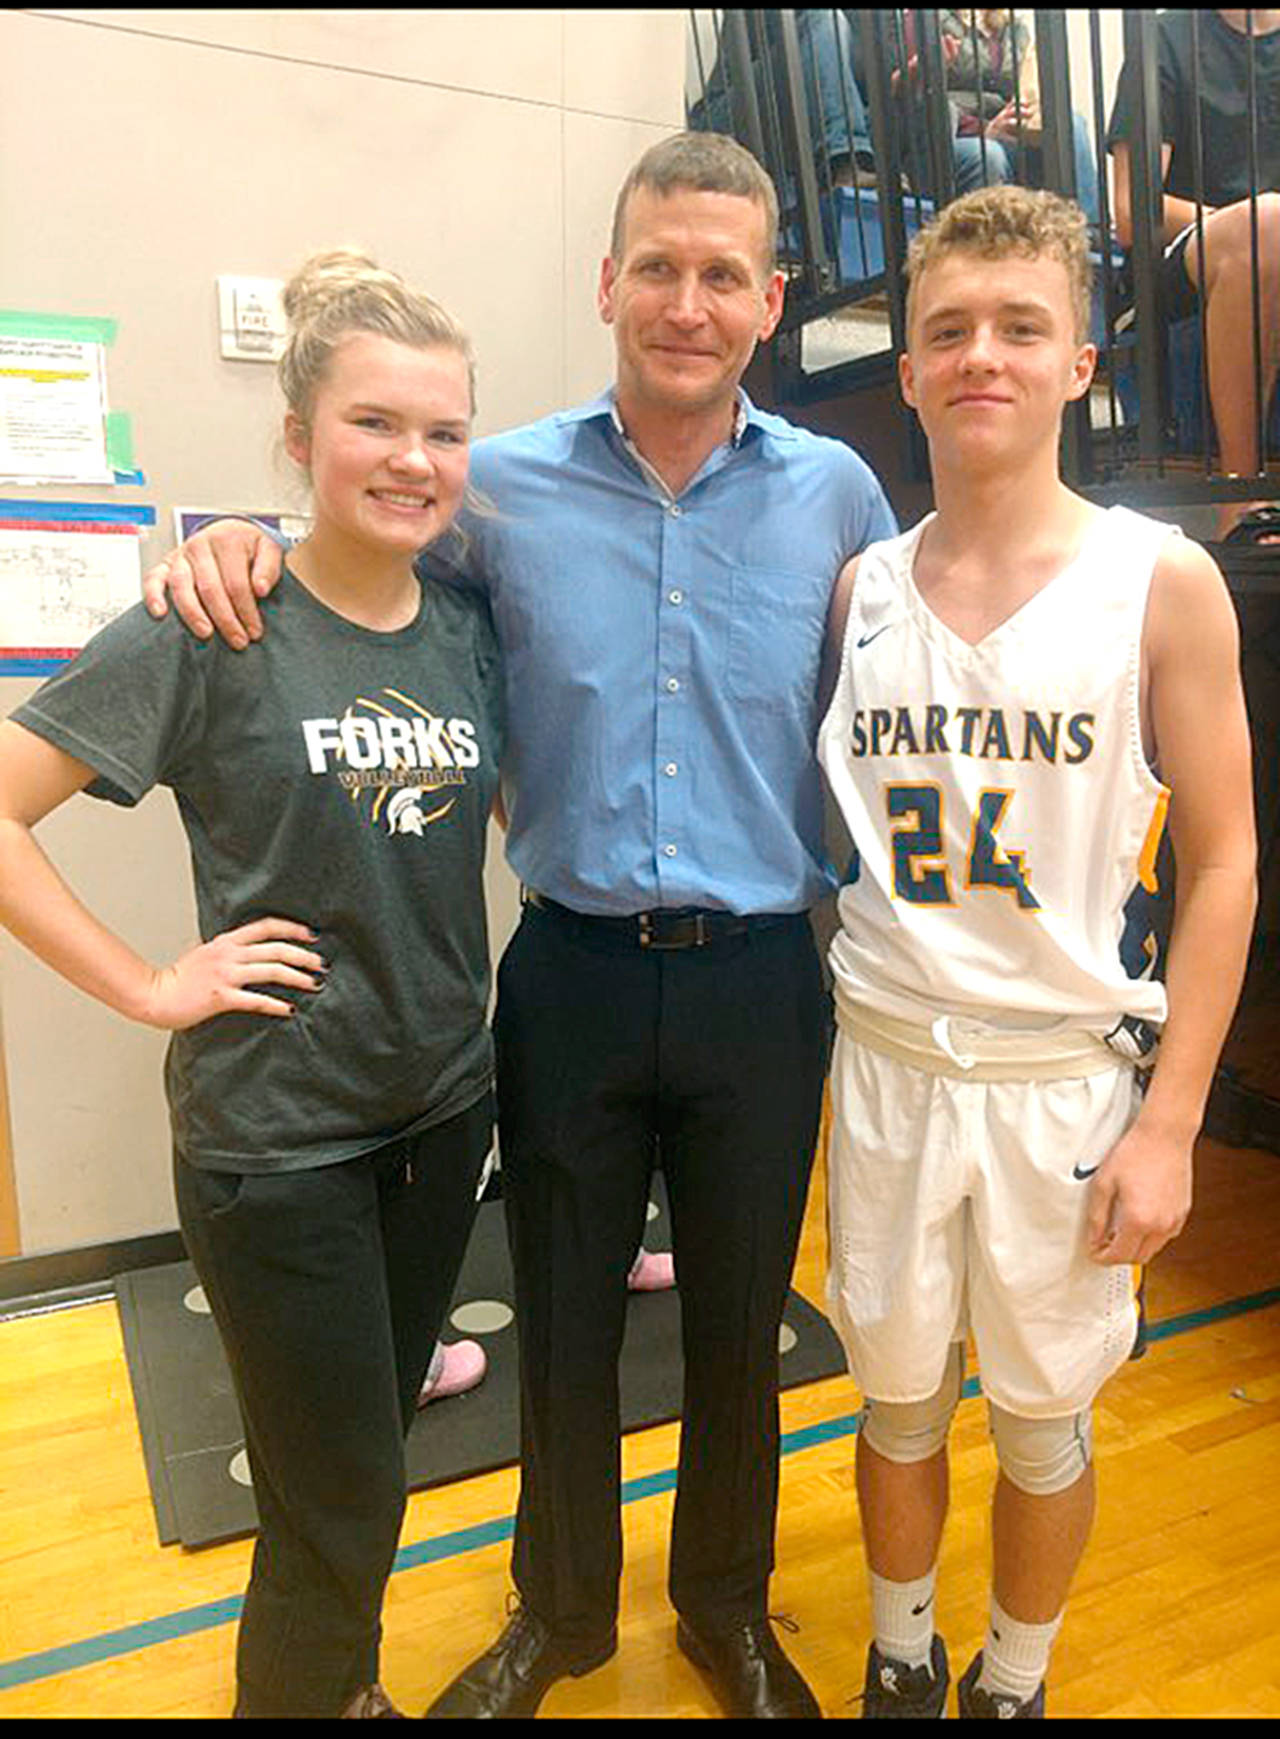 AREA SPORTS BRIEFS: Olson inducted into Forks High School Hall of Fame ...